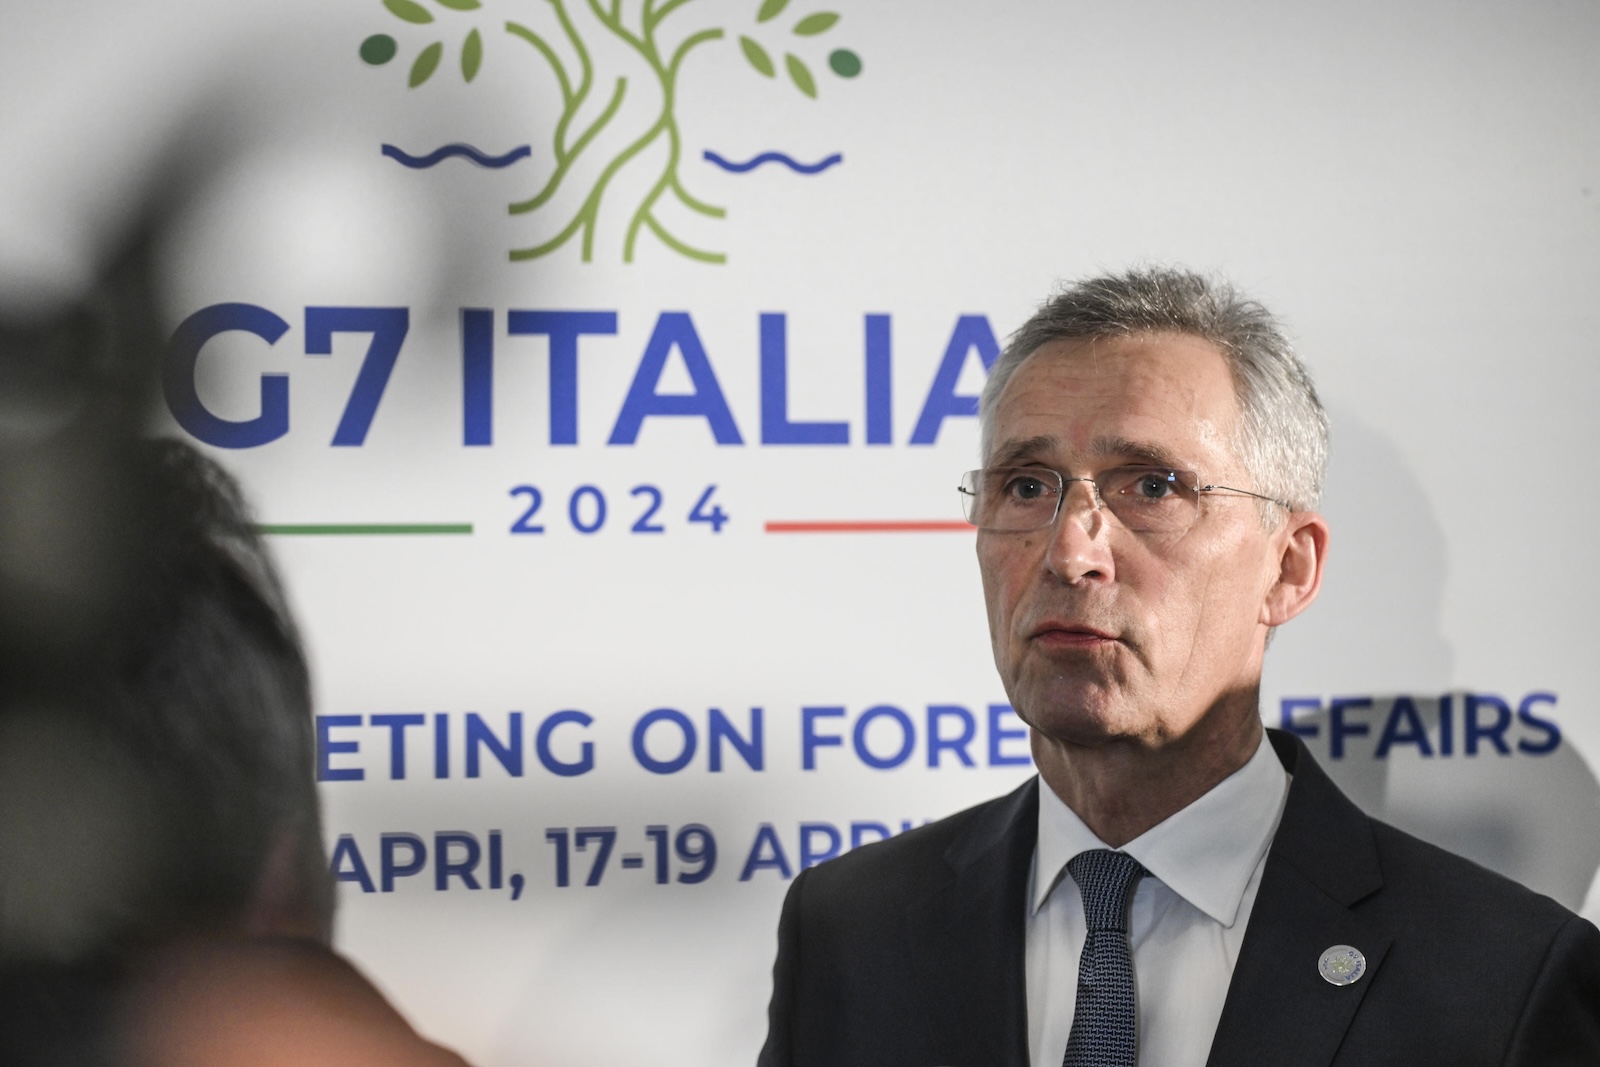 epa11286595 NATO Secretary General Jens Stoltenberg gives a statement to the media in Capri, southern Italy, 18 April 2024, on the second day of the G7 Foreign Ministers meeting. Foreign ministers of the Group of Seven (G7) gathered on the southern Italian island of Capri for a three-day of encounters, from 17 to 19 April, to discuss support for Ukraine and addressing the crisis in the Middle East, among other topics. On 18 April, Stoltenberg participated in the meeting.  EPA/CIRO FUSCO